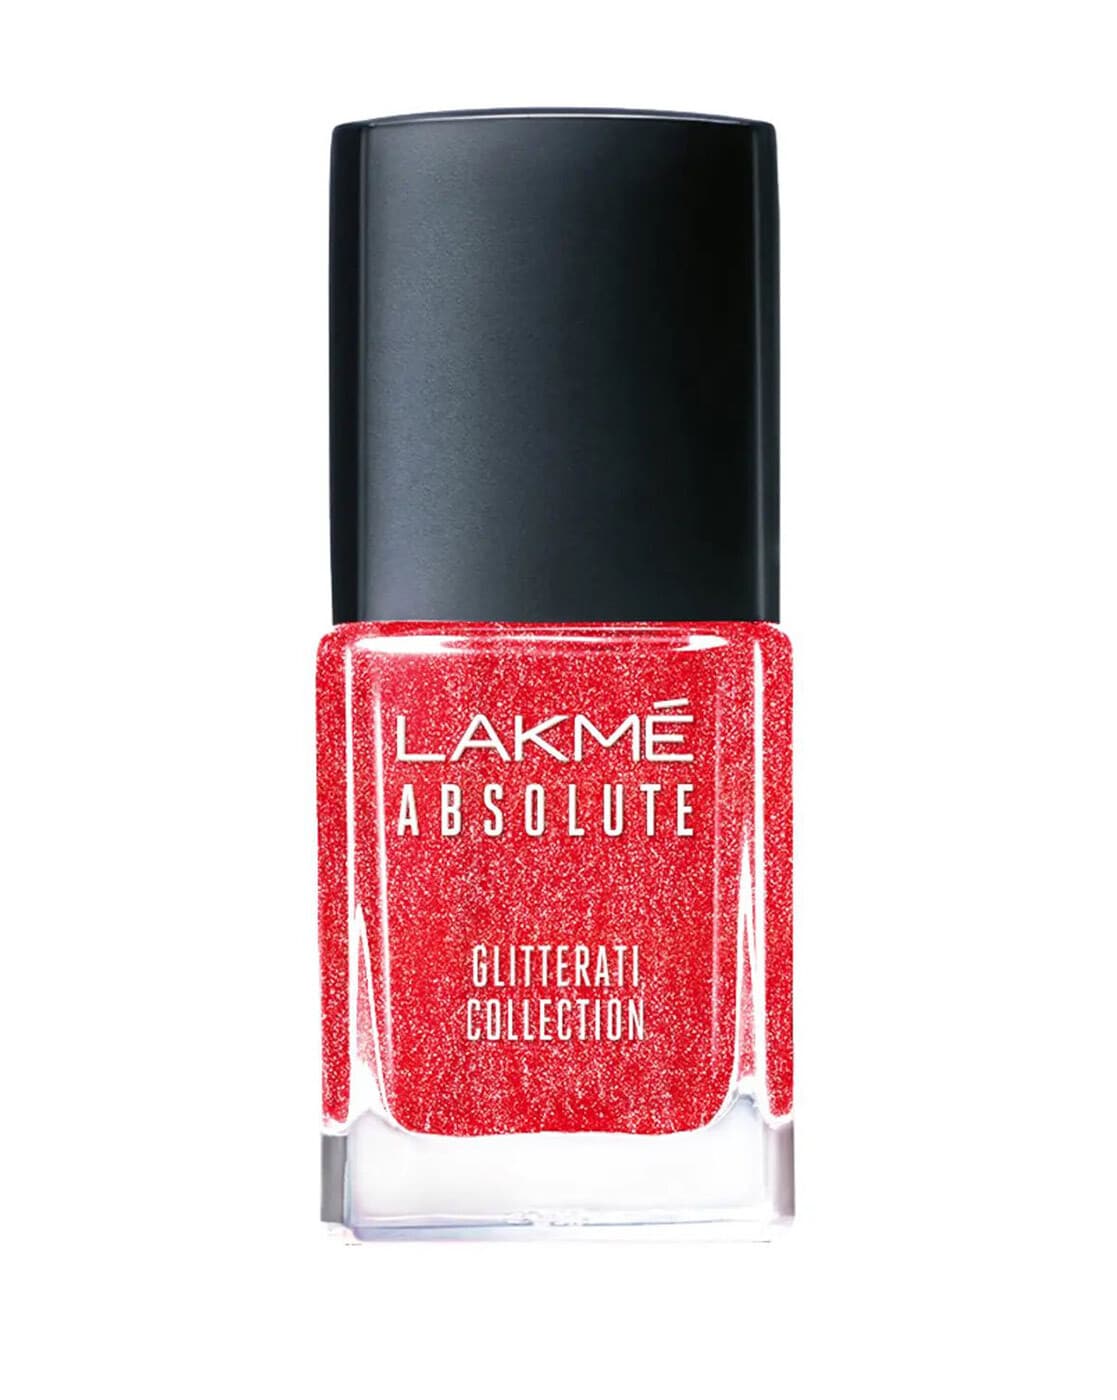 Buy Lakmé Color Crush Nail Art F1, Multicolor, 6 ml Online at Low Prices in  India - Amazon.in